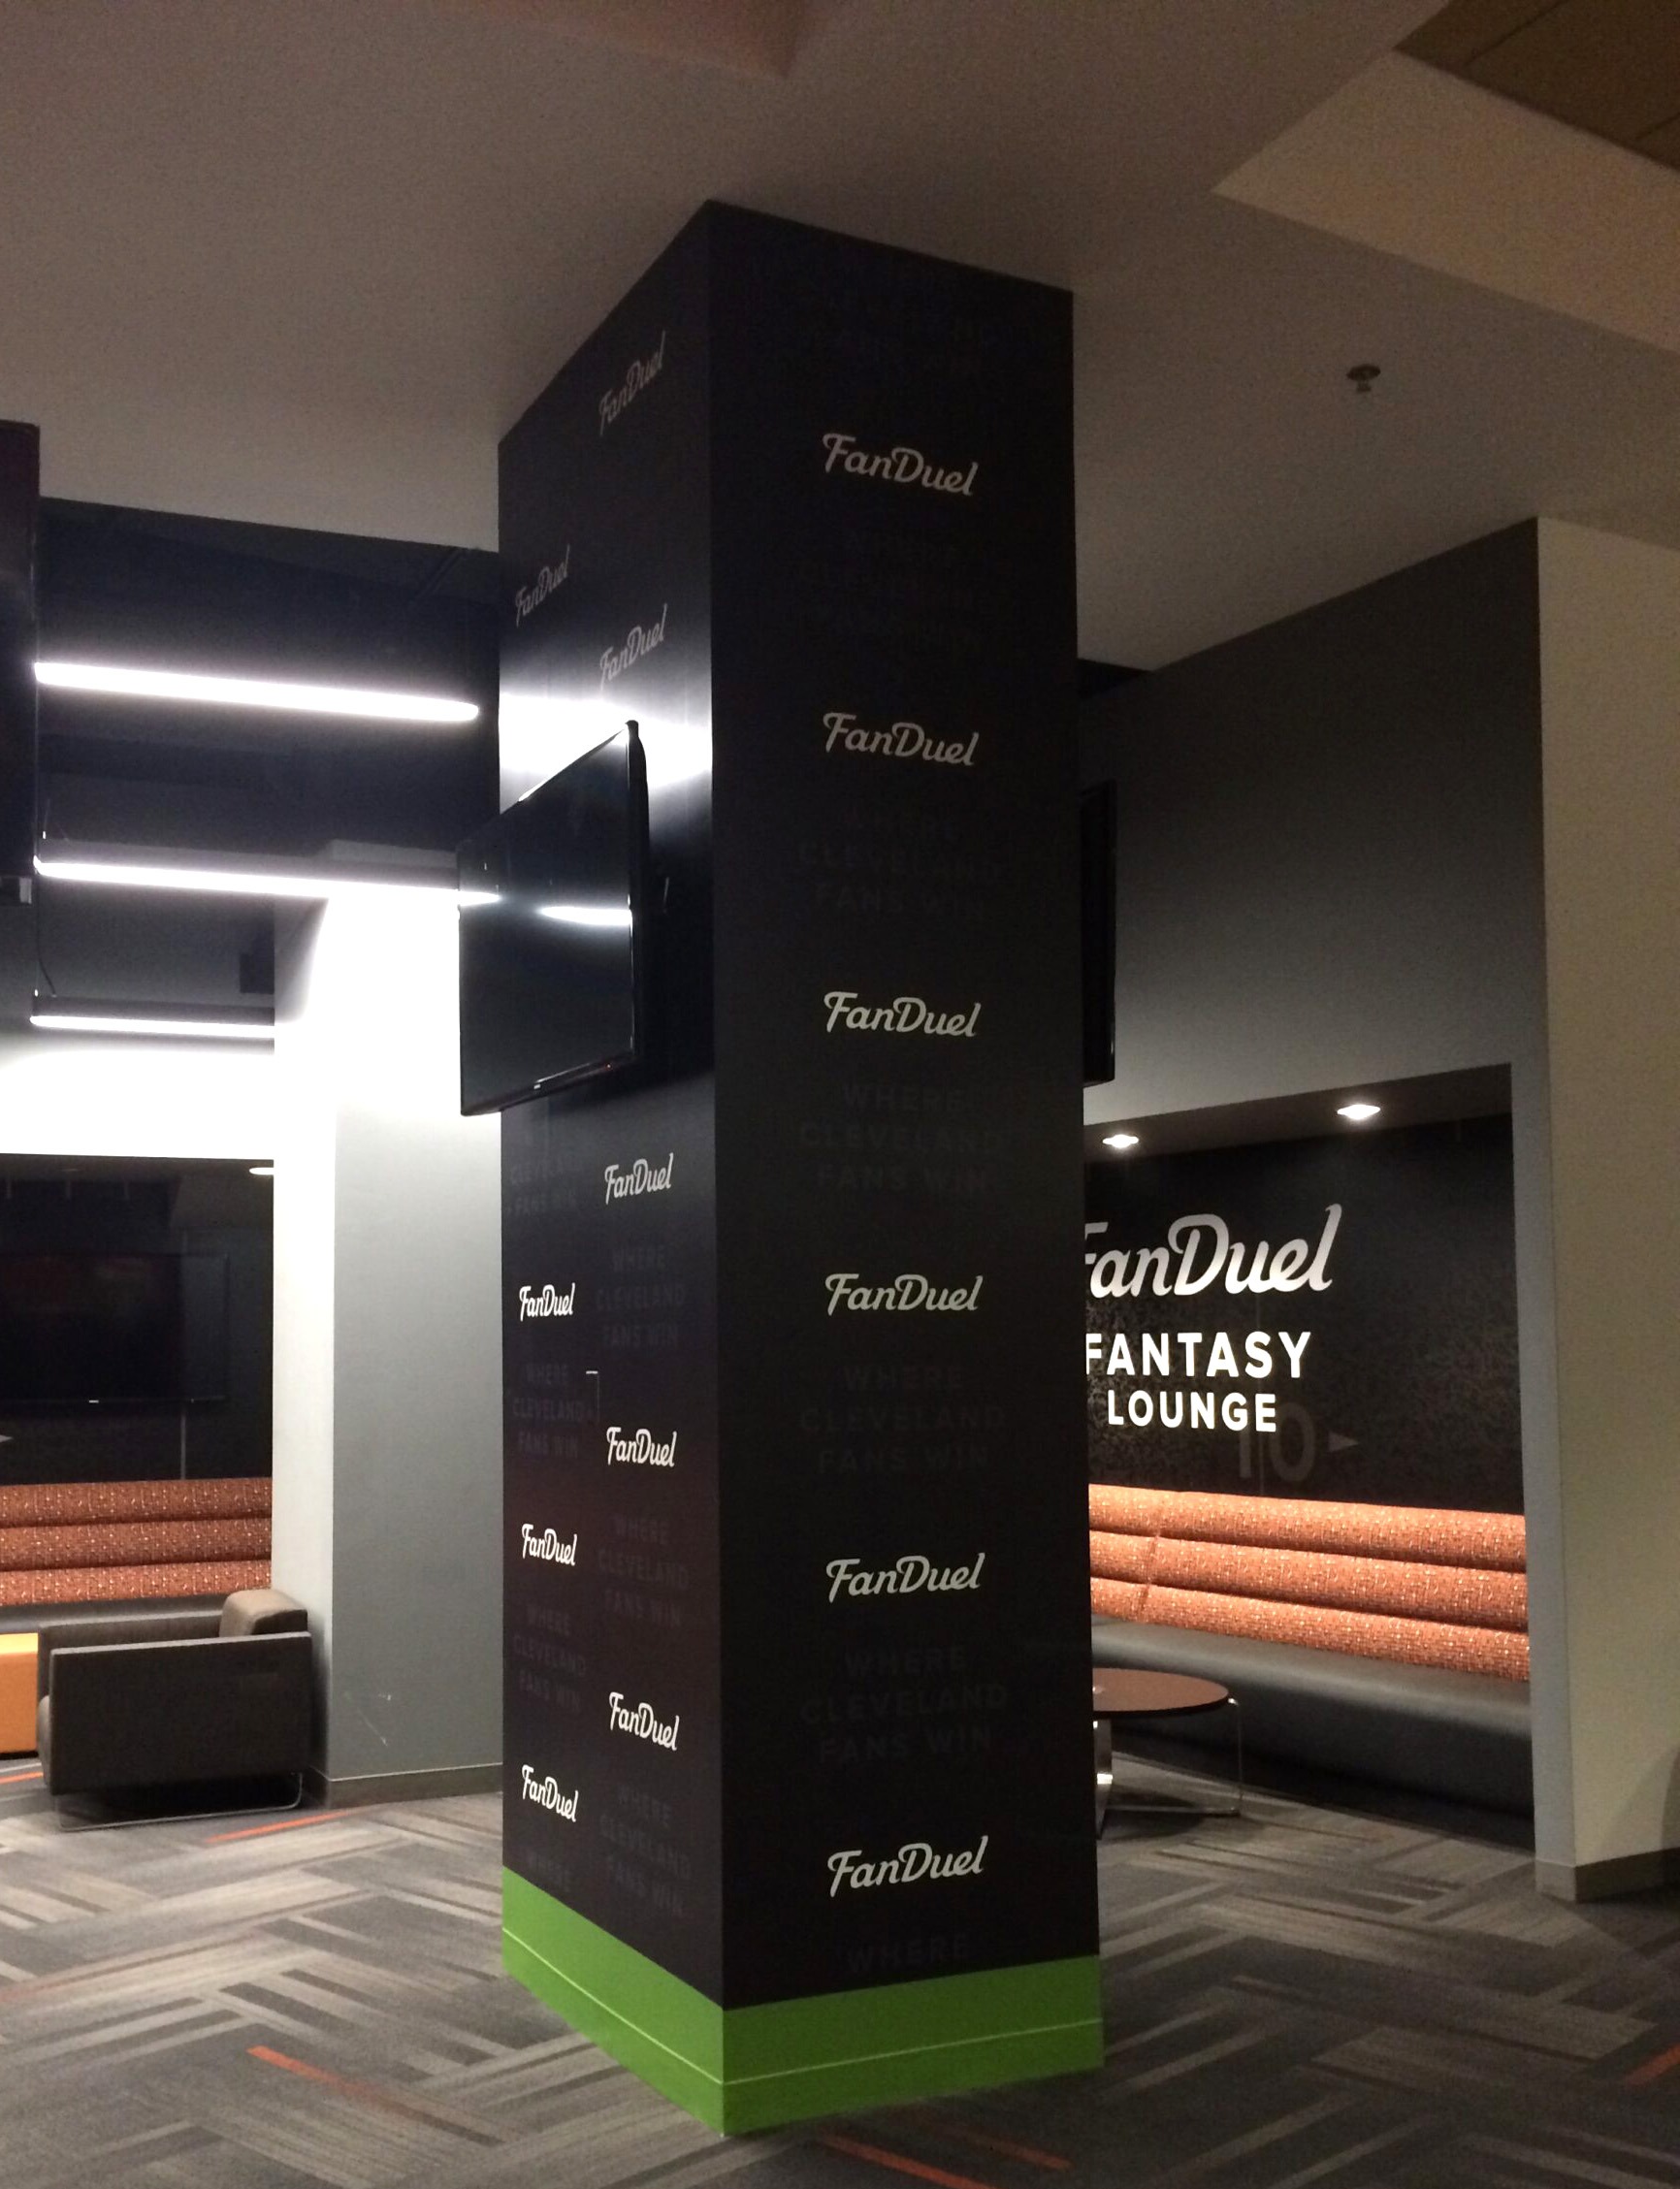 Wall Graphics printed and installed for Fan Duel Section at the Cleveland Browns Stadium